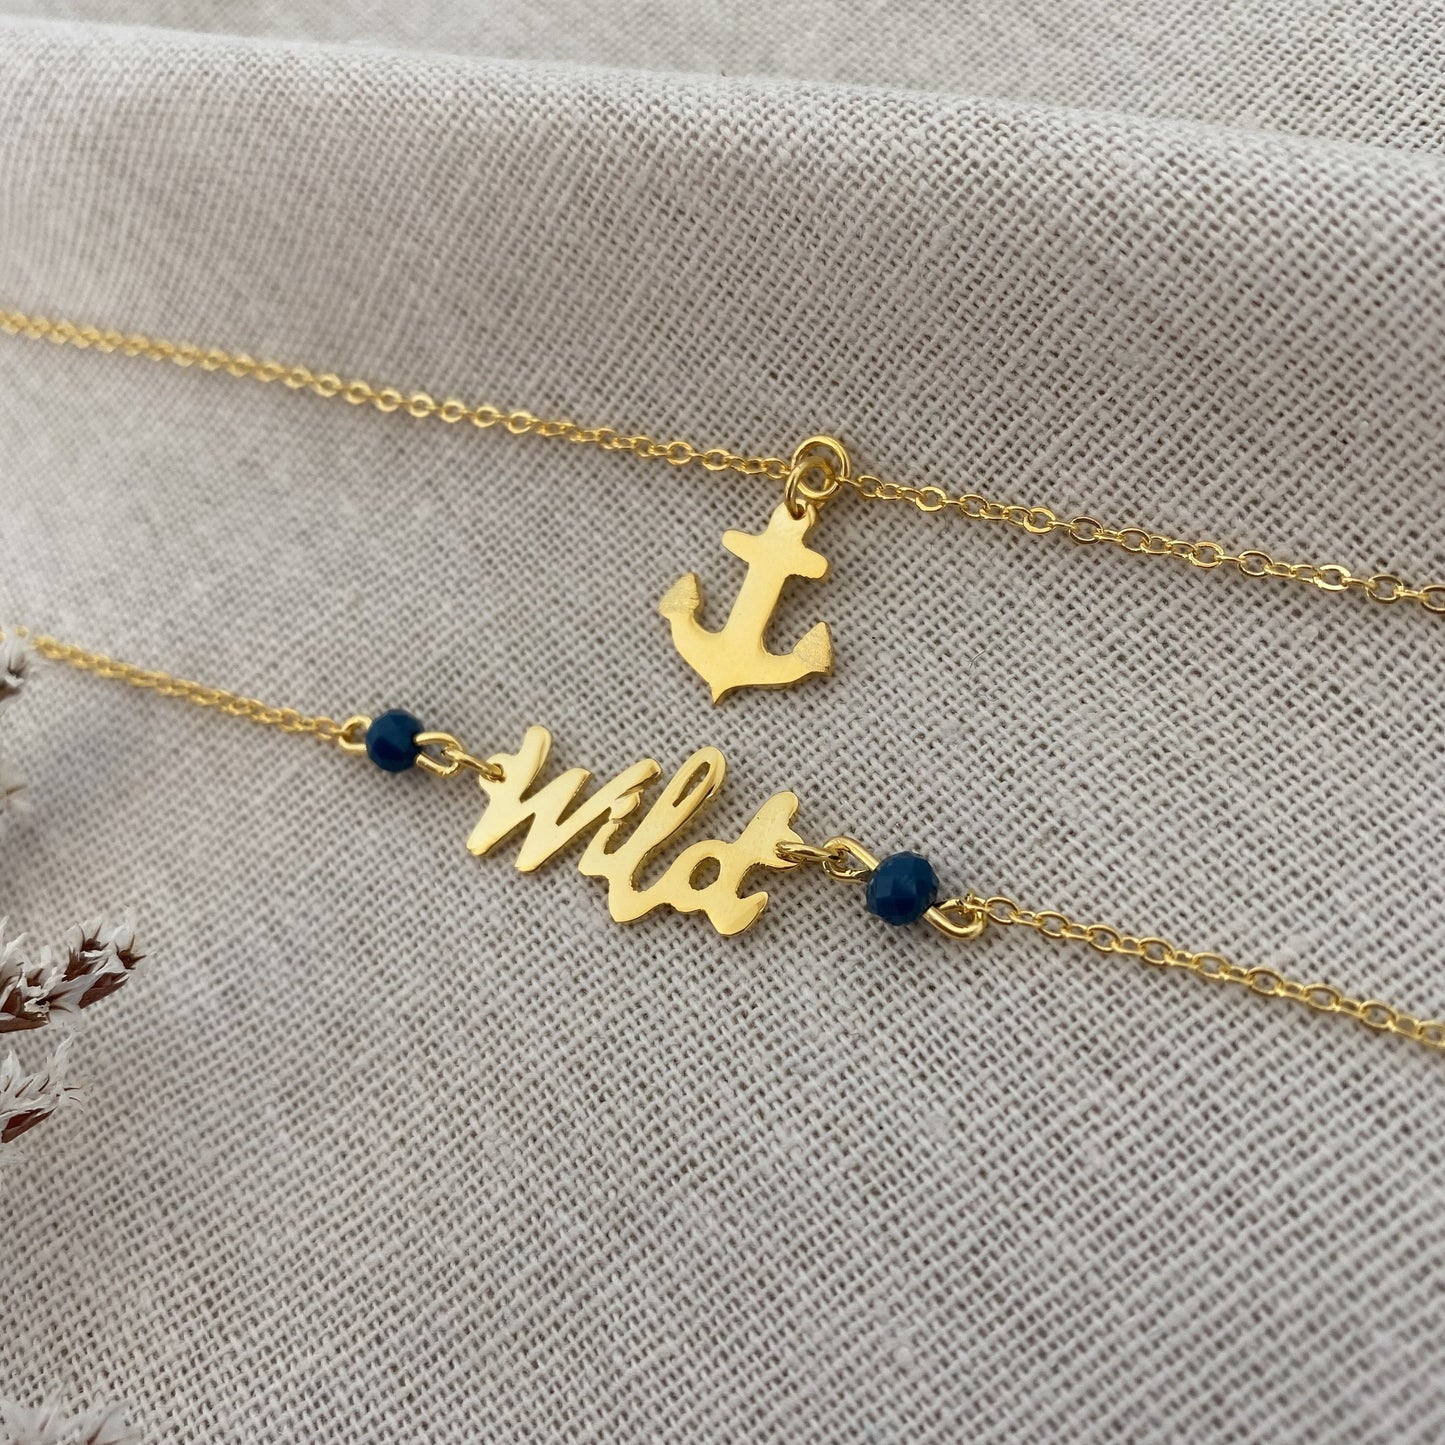 Wild & Anchor Anklets